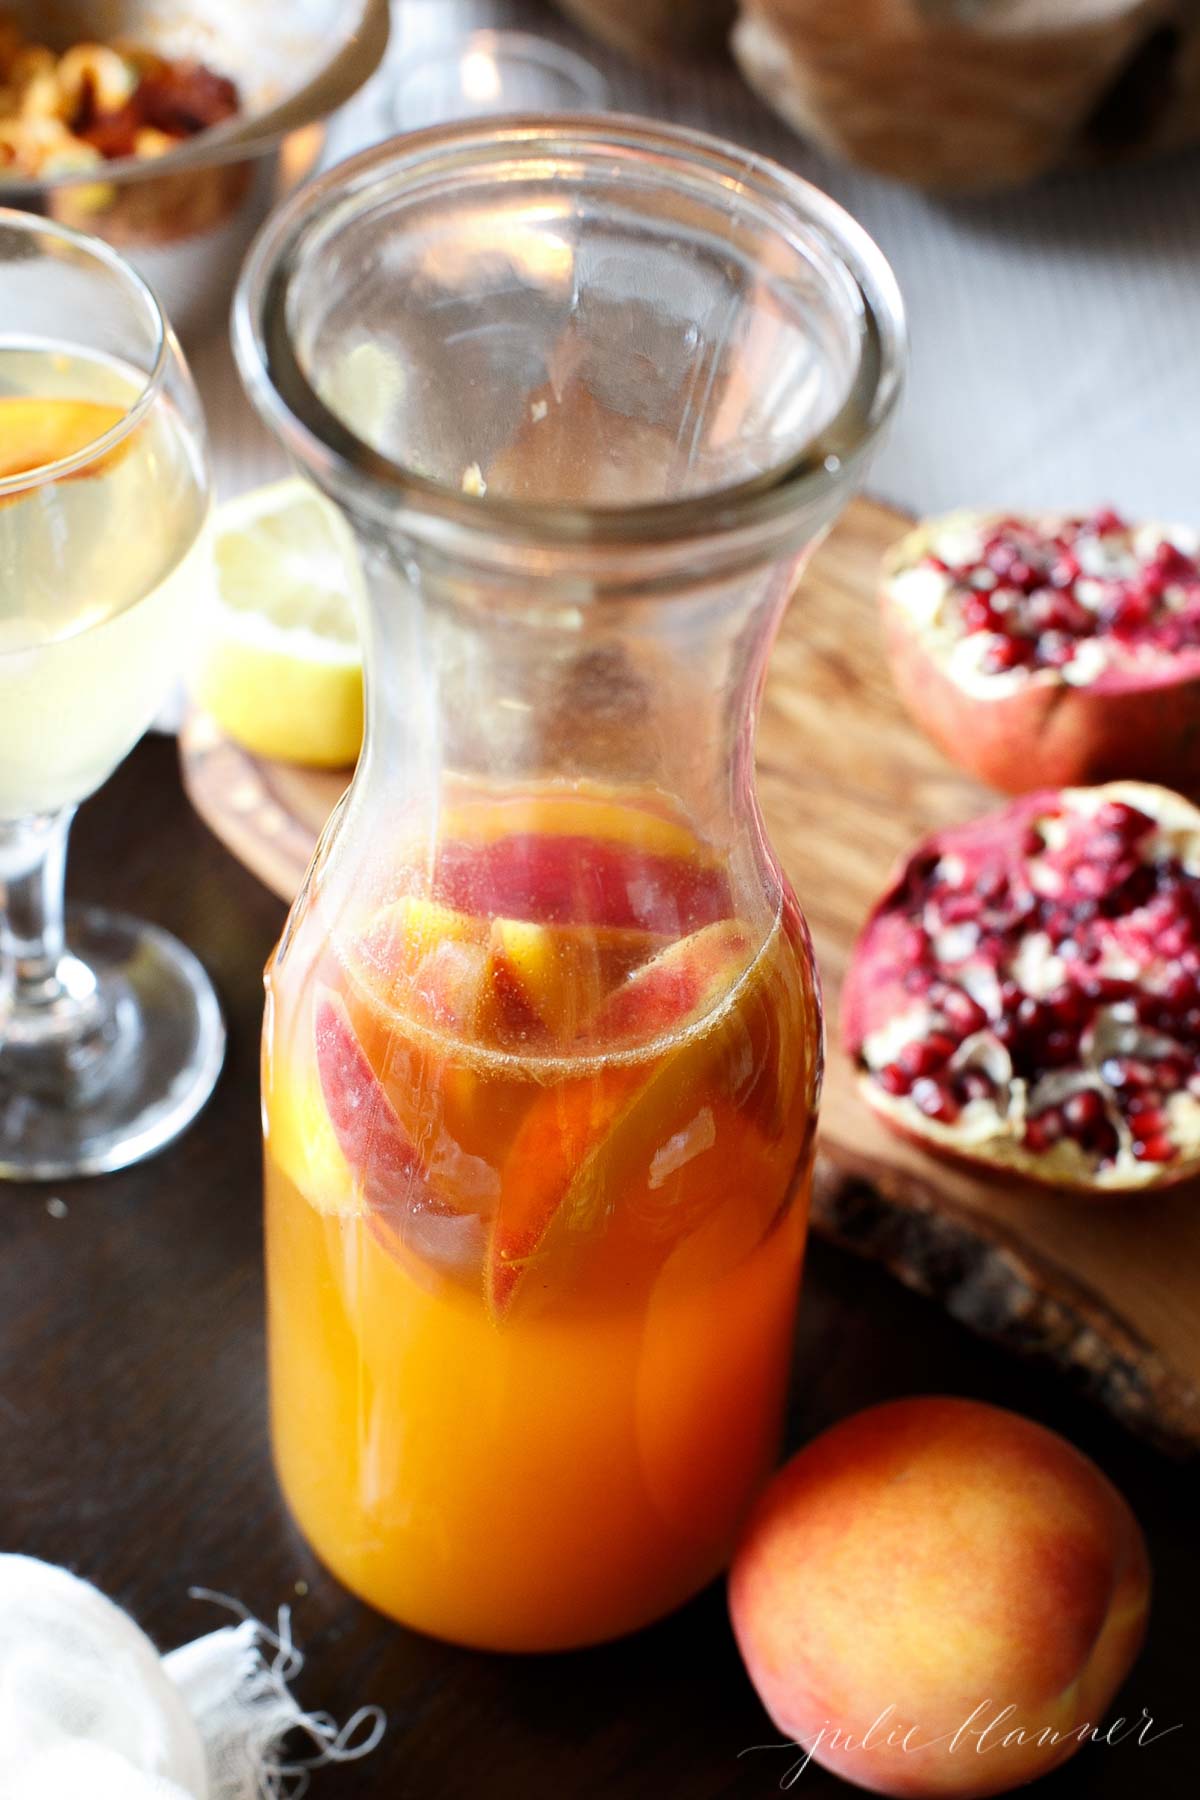 Prosecco Sangria in a glass carafe with pomegranate and peaches in the back.